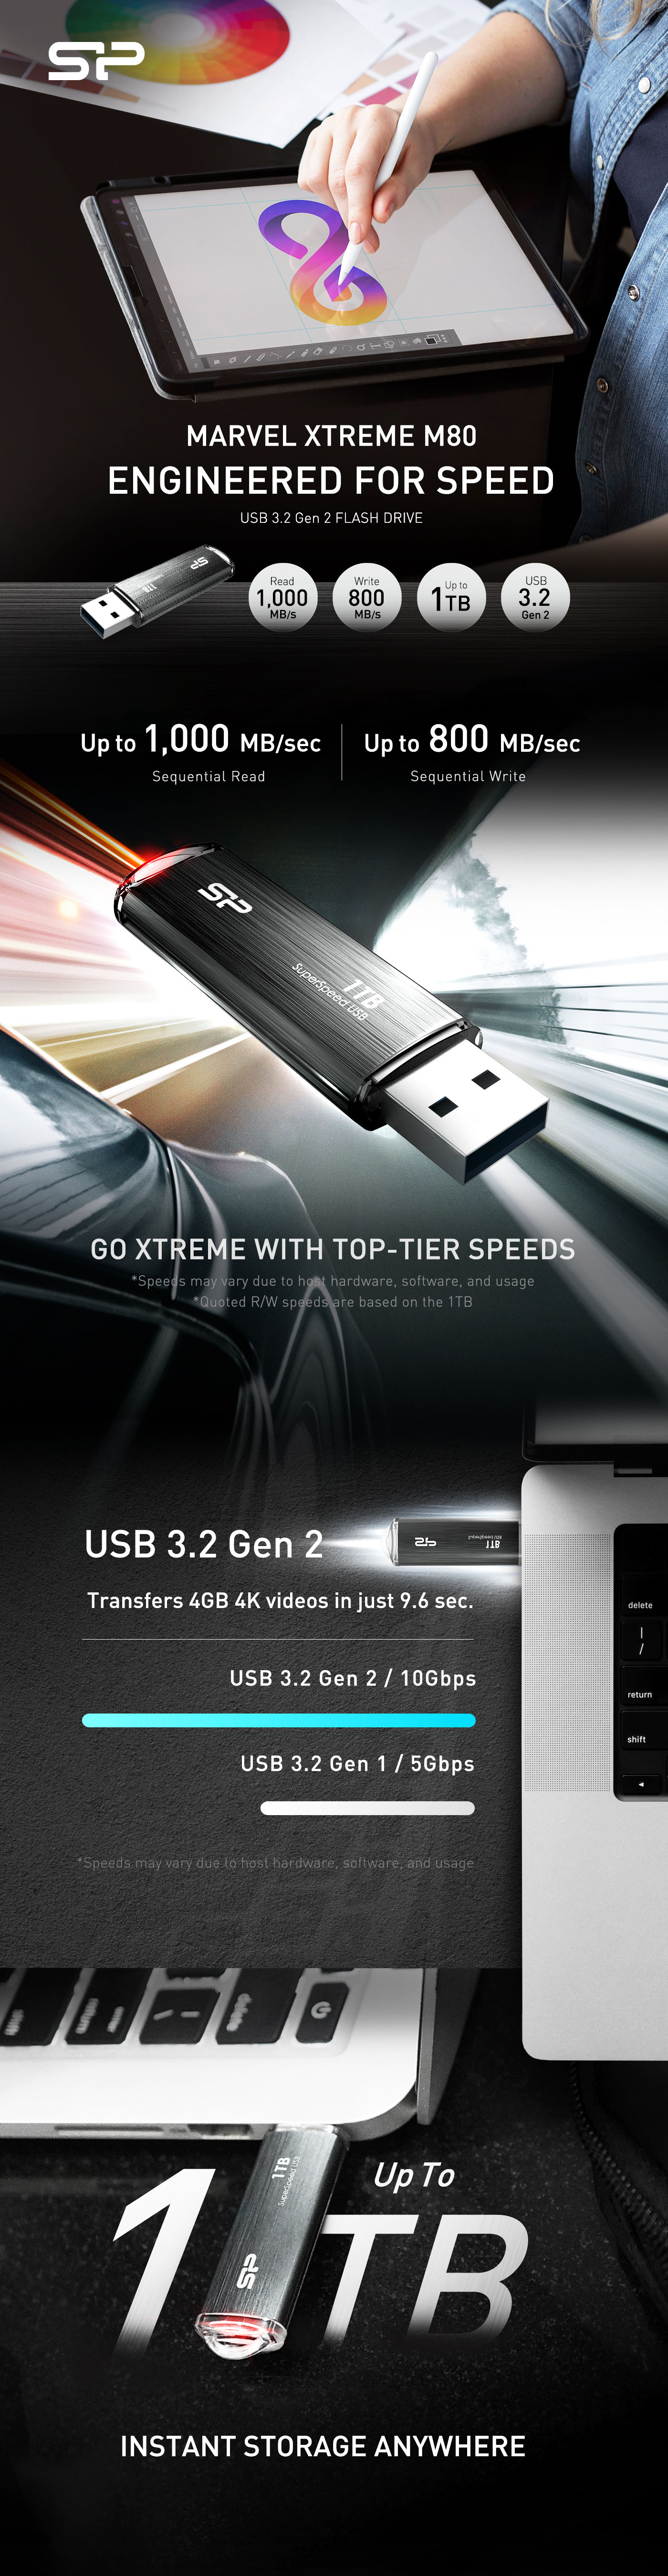 USB-Flash-Drives-Silicon-Power-1TB-Marvel-Xtreme-M80-1-000MB-s-USB-3-2-Gen-2-Solid-State-Flash-Drive-17